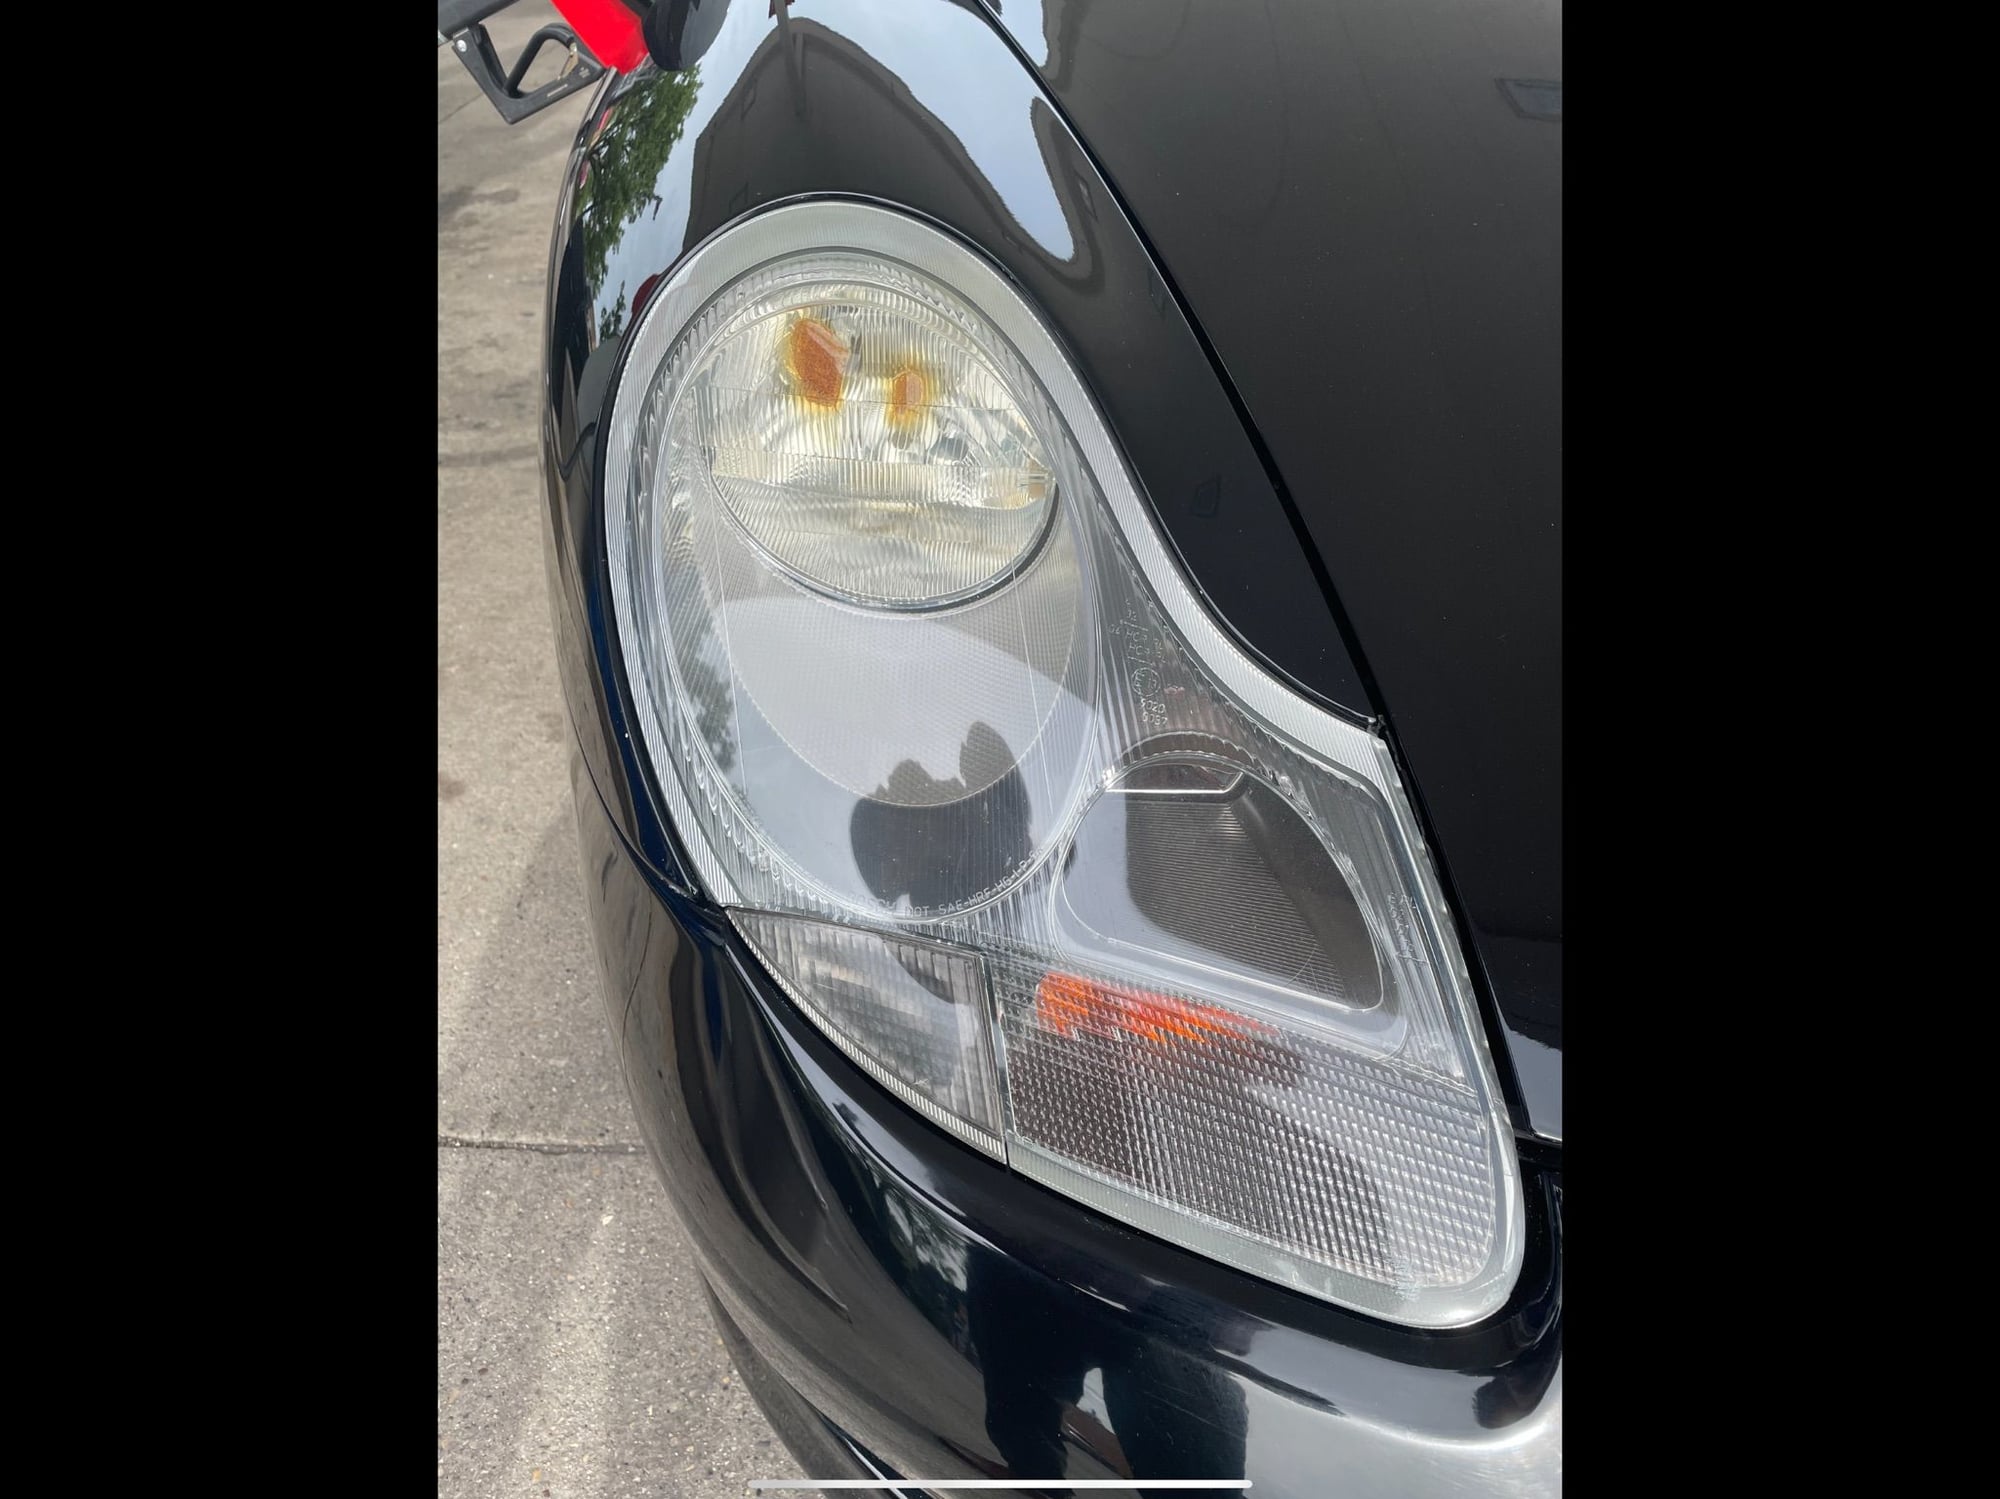 2000 Porsche 911 - Headlamps for sale - Milwaukee, WI 53202, United States